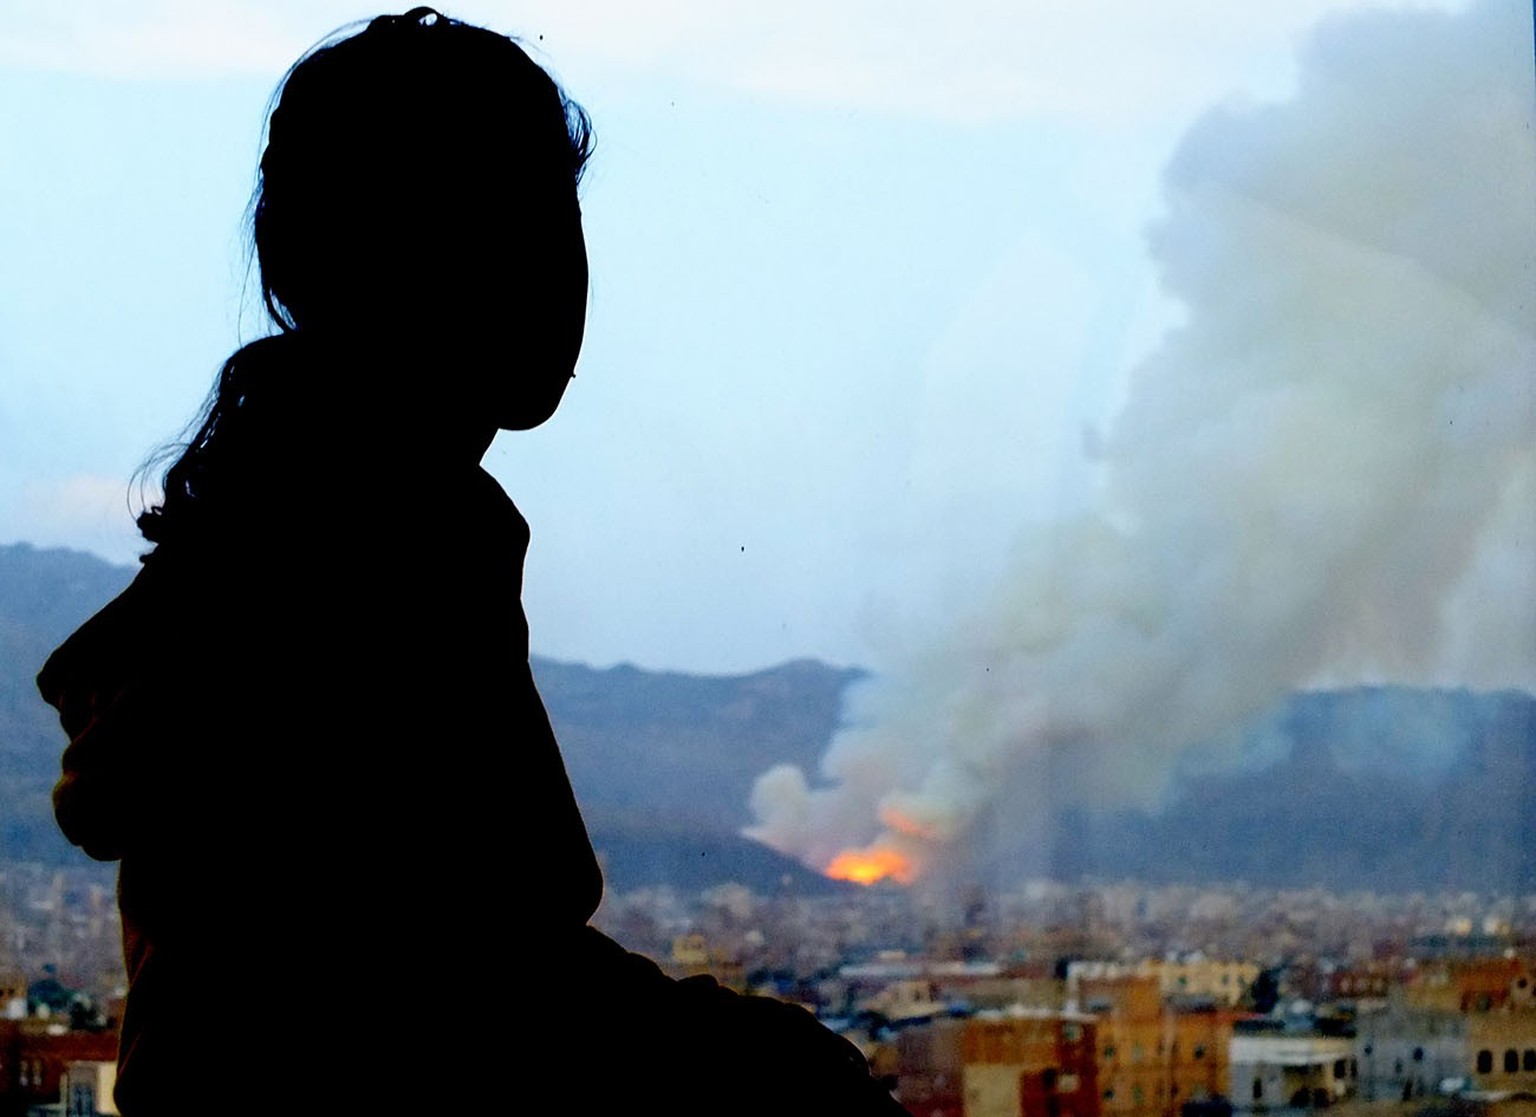 This photo shows Amal who is looking at her destroyed home in Sana’a after it was hit by an airstrike in April 2015.